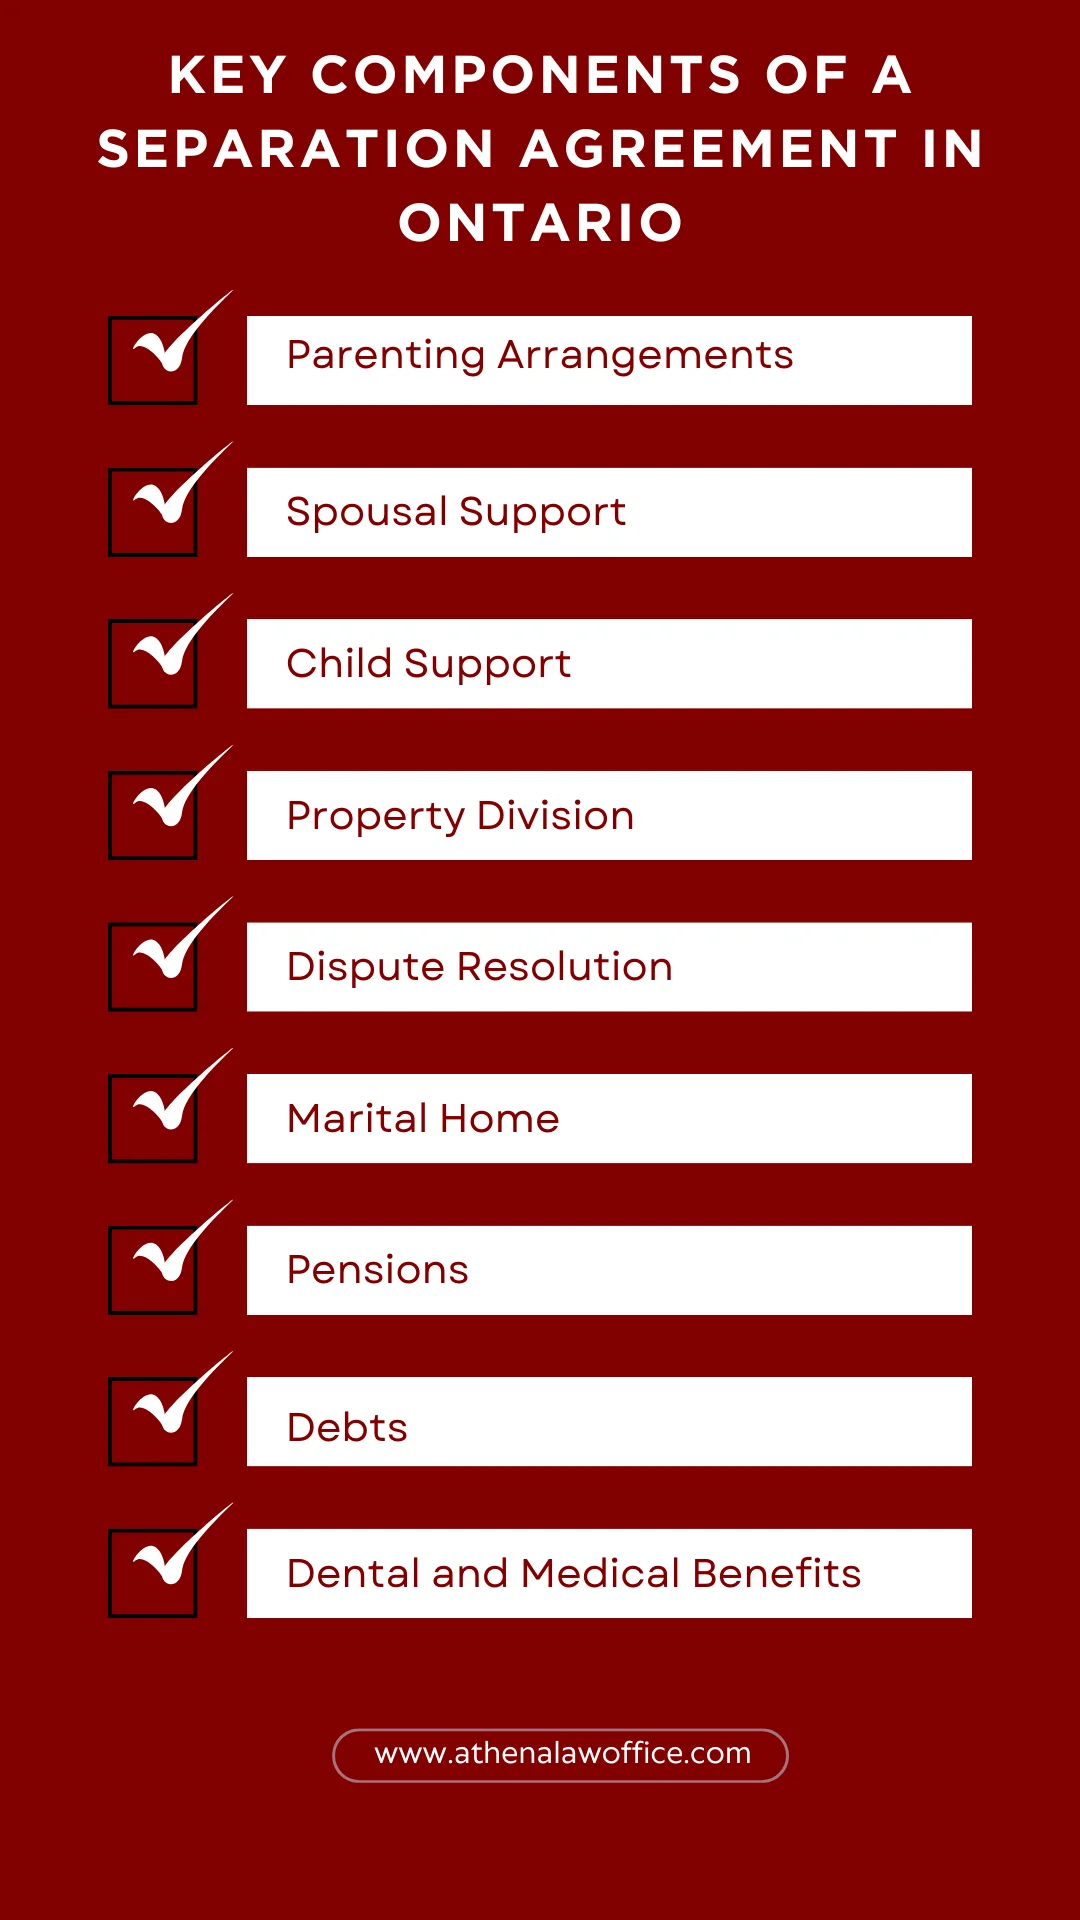 A list of the key components of a separation agreement in Ontario